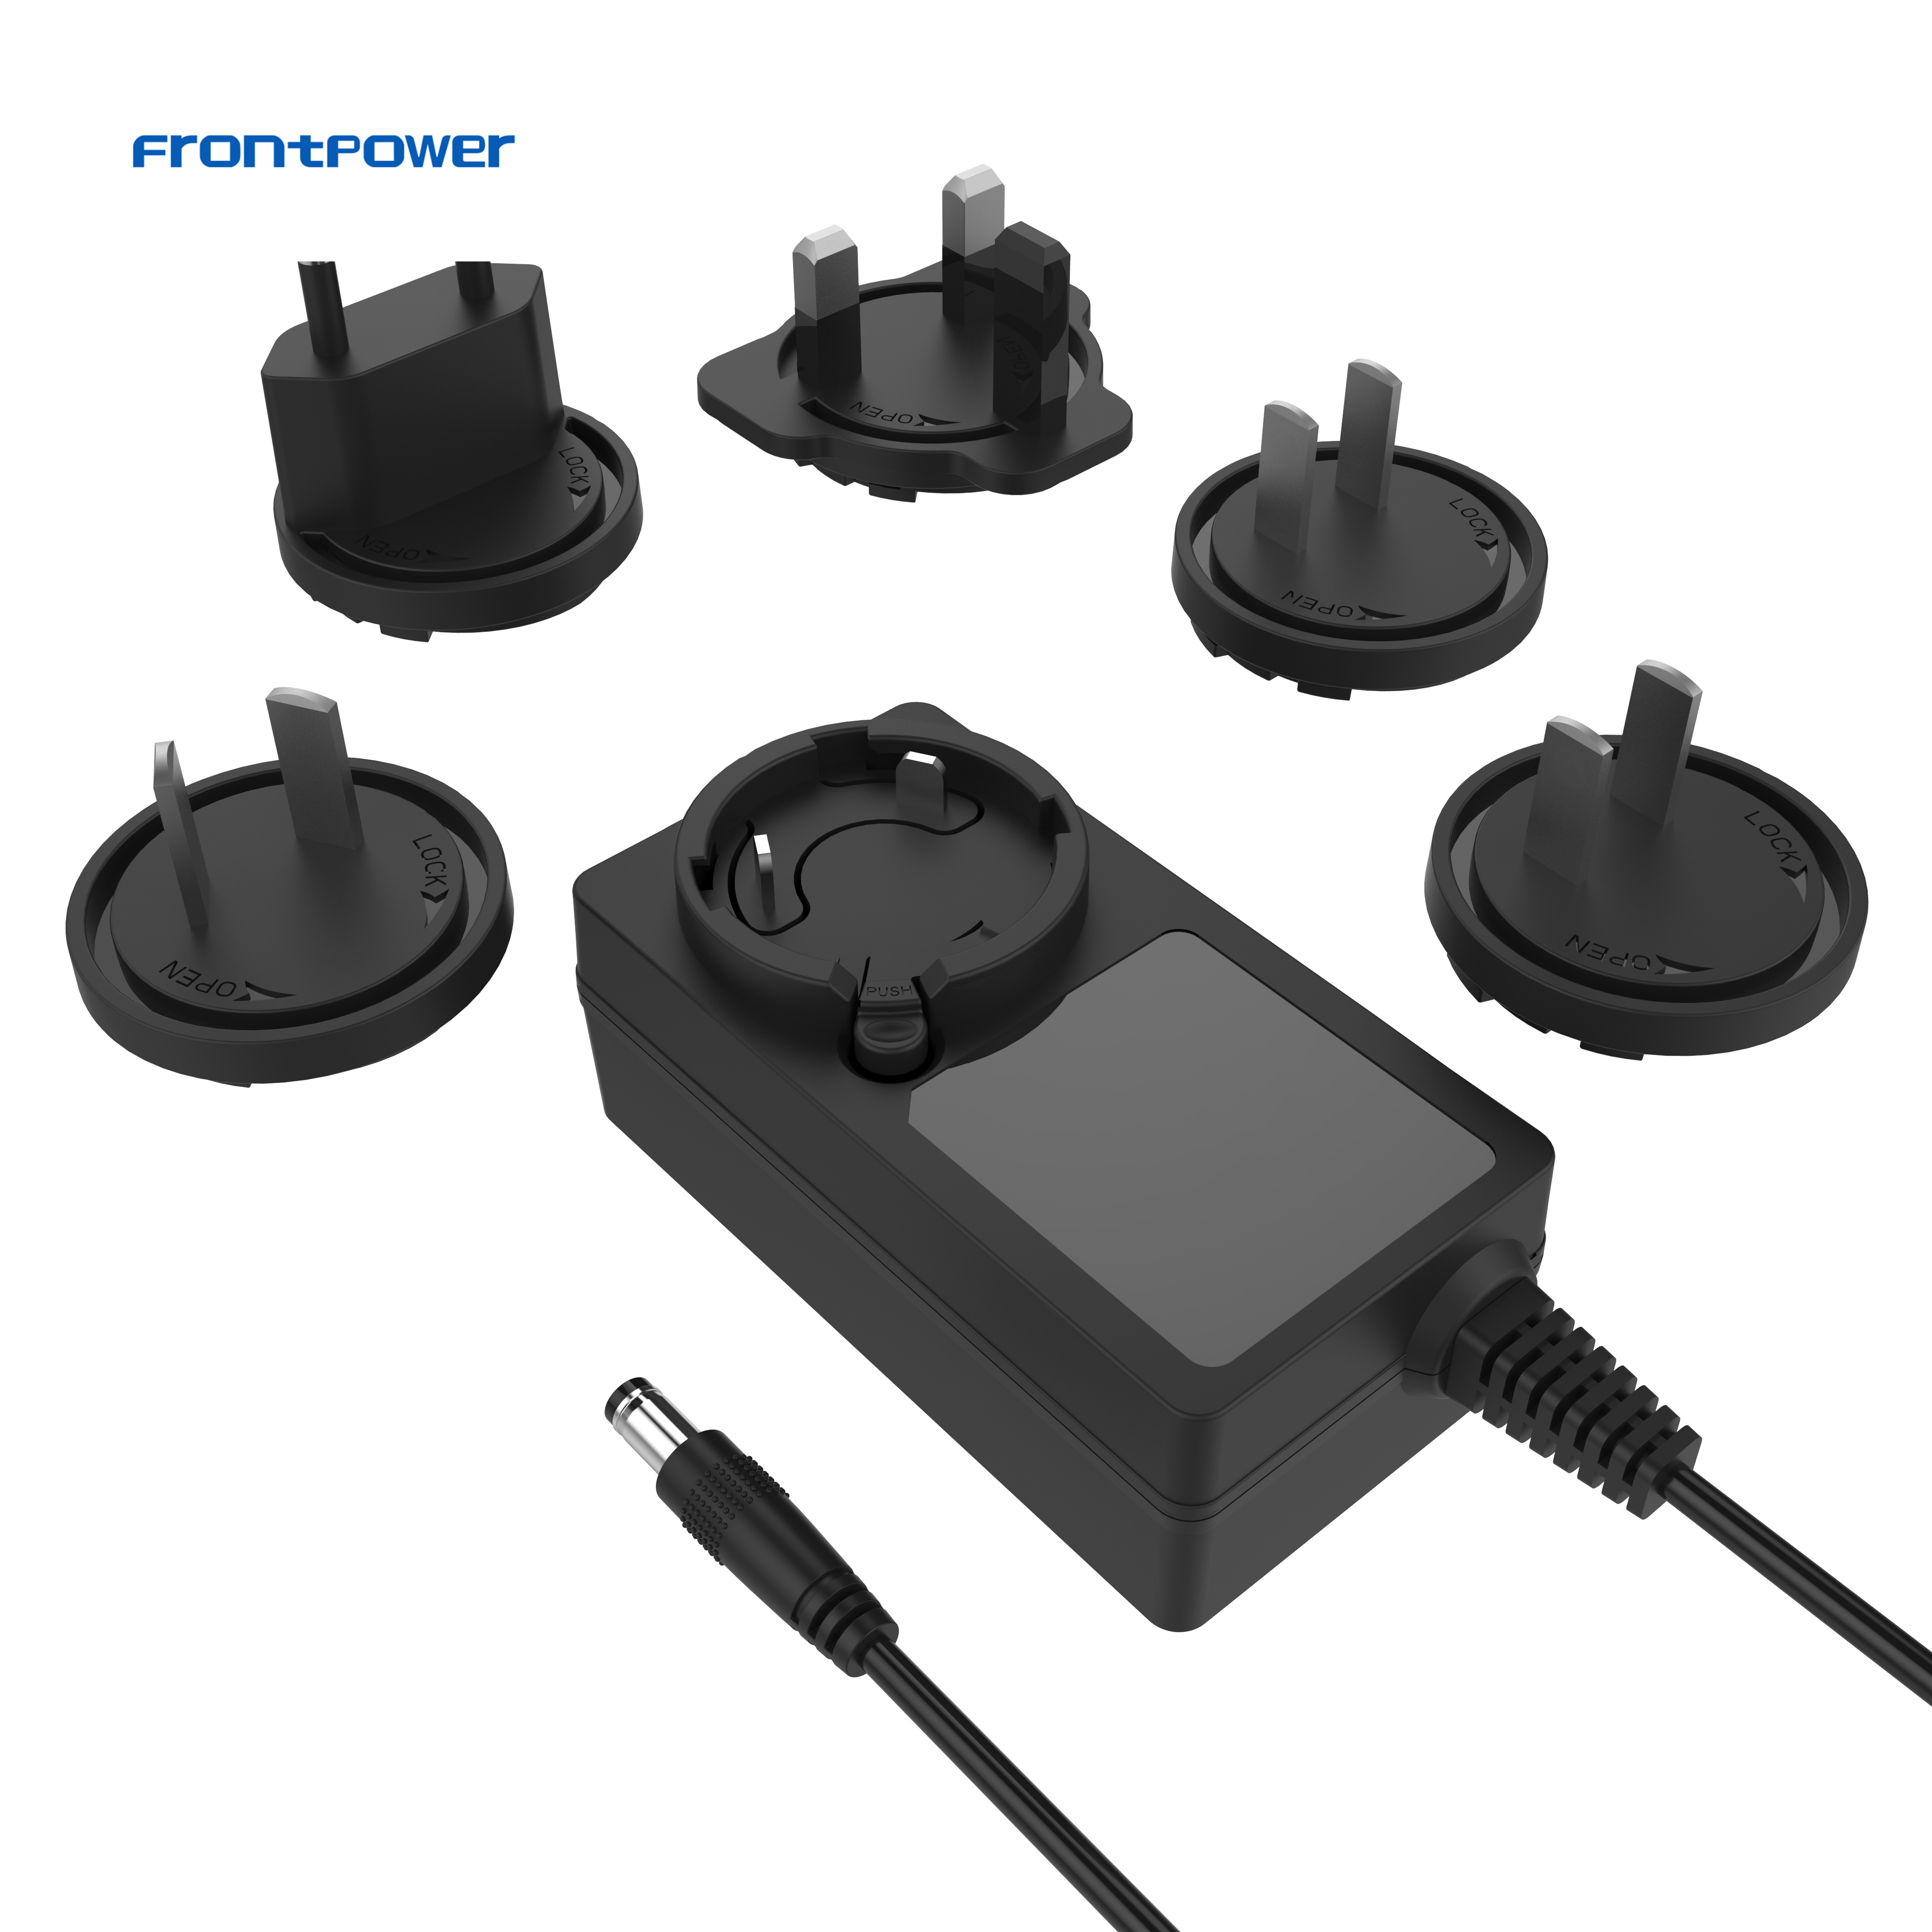 12V 4A 15V 3A 3.2A 24V 2A US EU UK AU PSE SAA IND Interchangeable Plug SMPS Power Adapter Supply Switch ACDC Charger